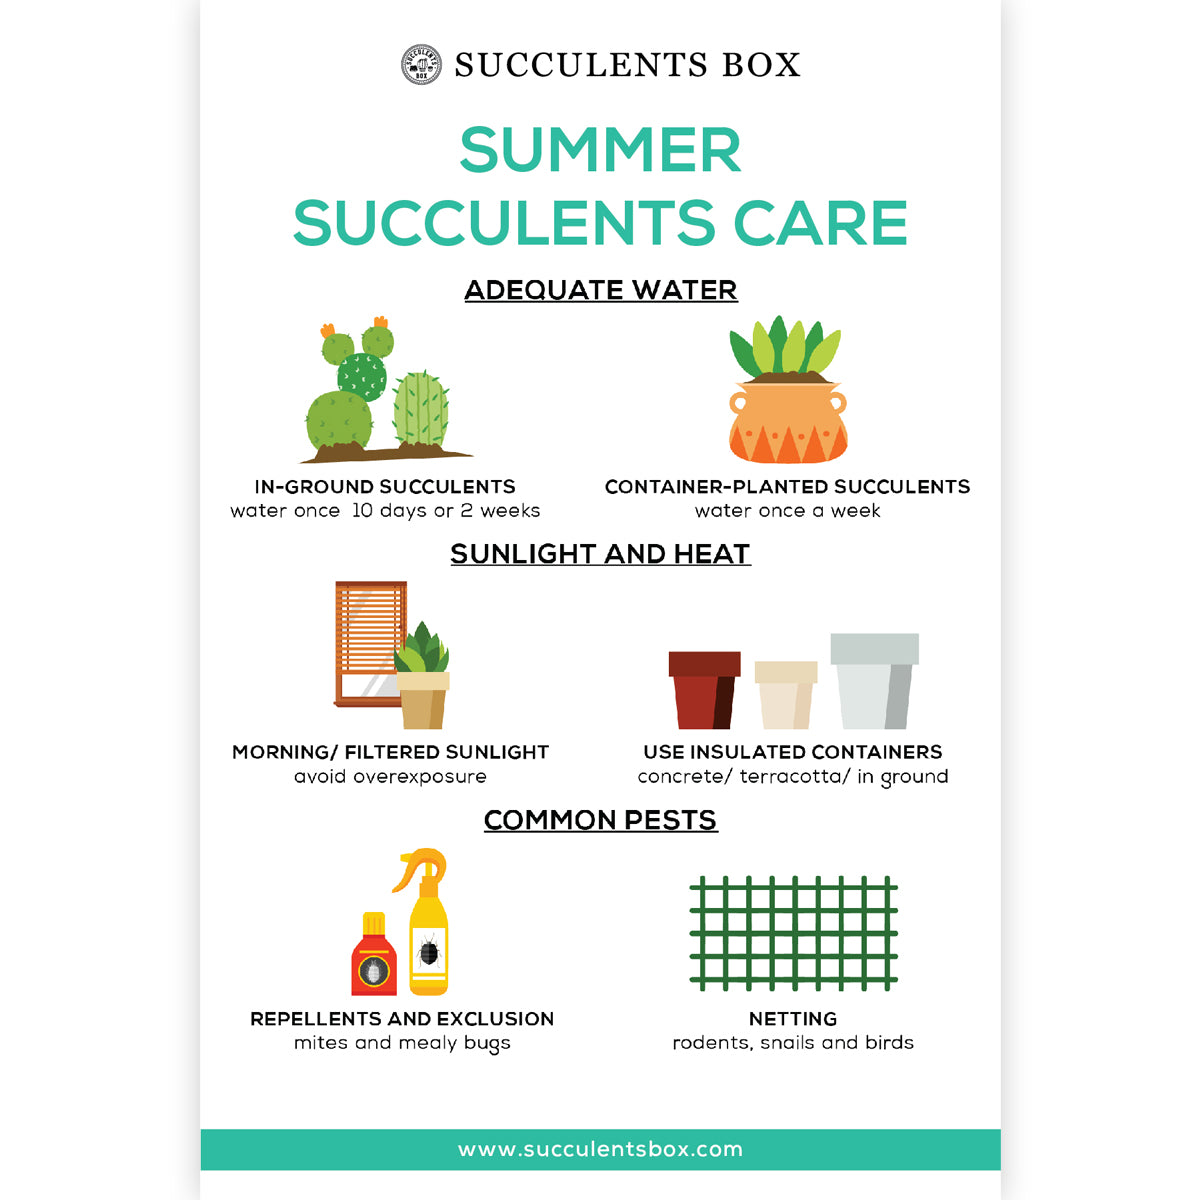 Summer Succulents Care Card for sale, How to care for succulents in summer, Succulent care instruction